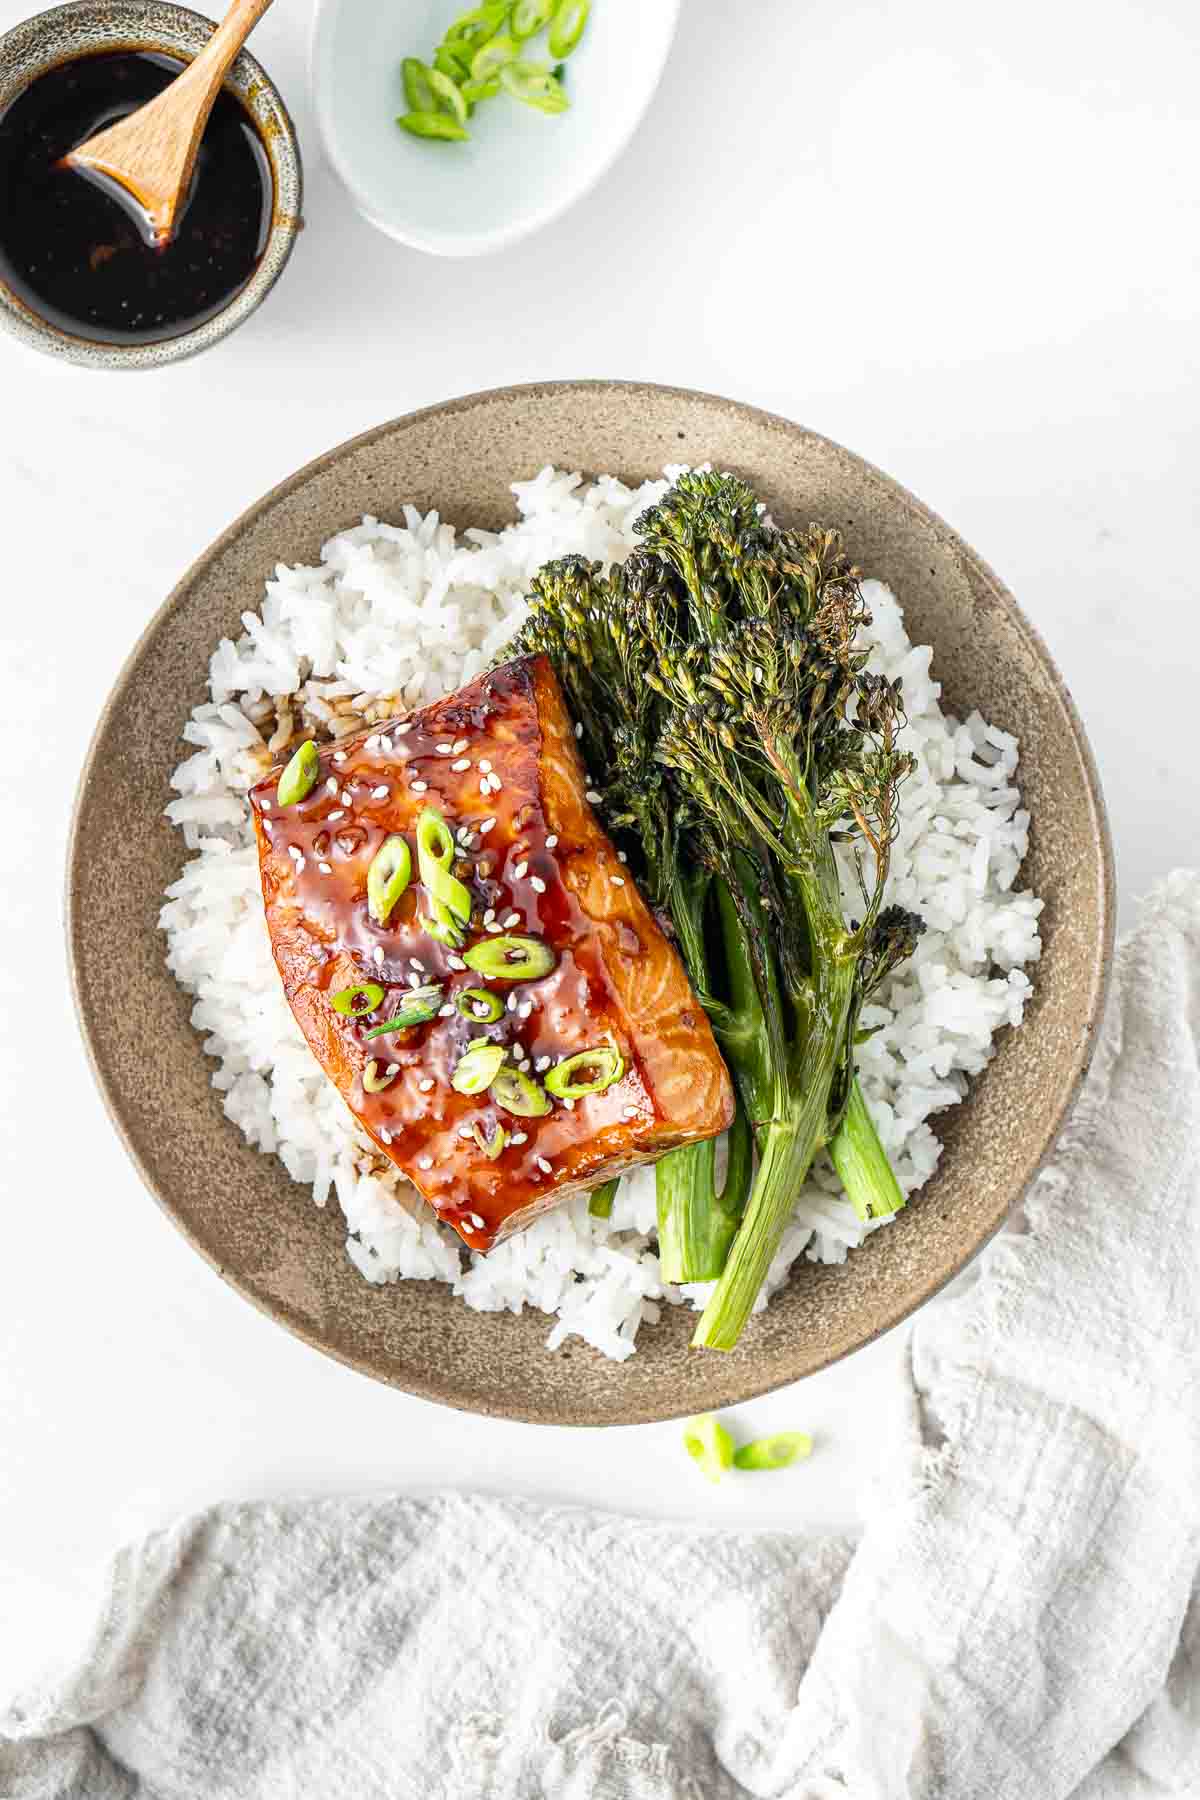 Teriyaki salmon fillet in a bowl with rice and roasted broccolini.